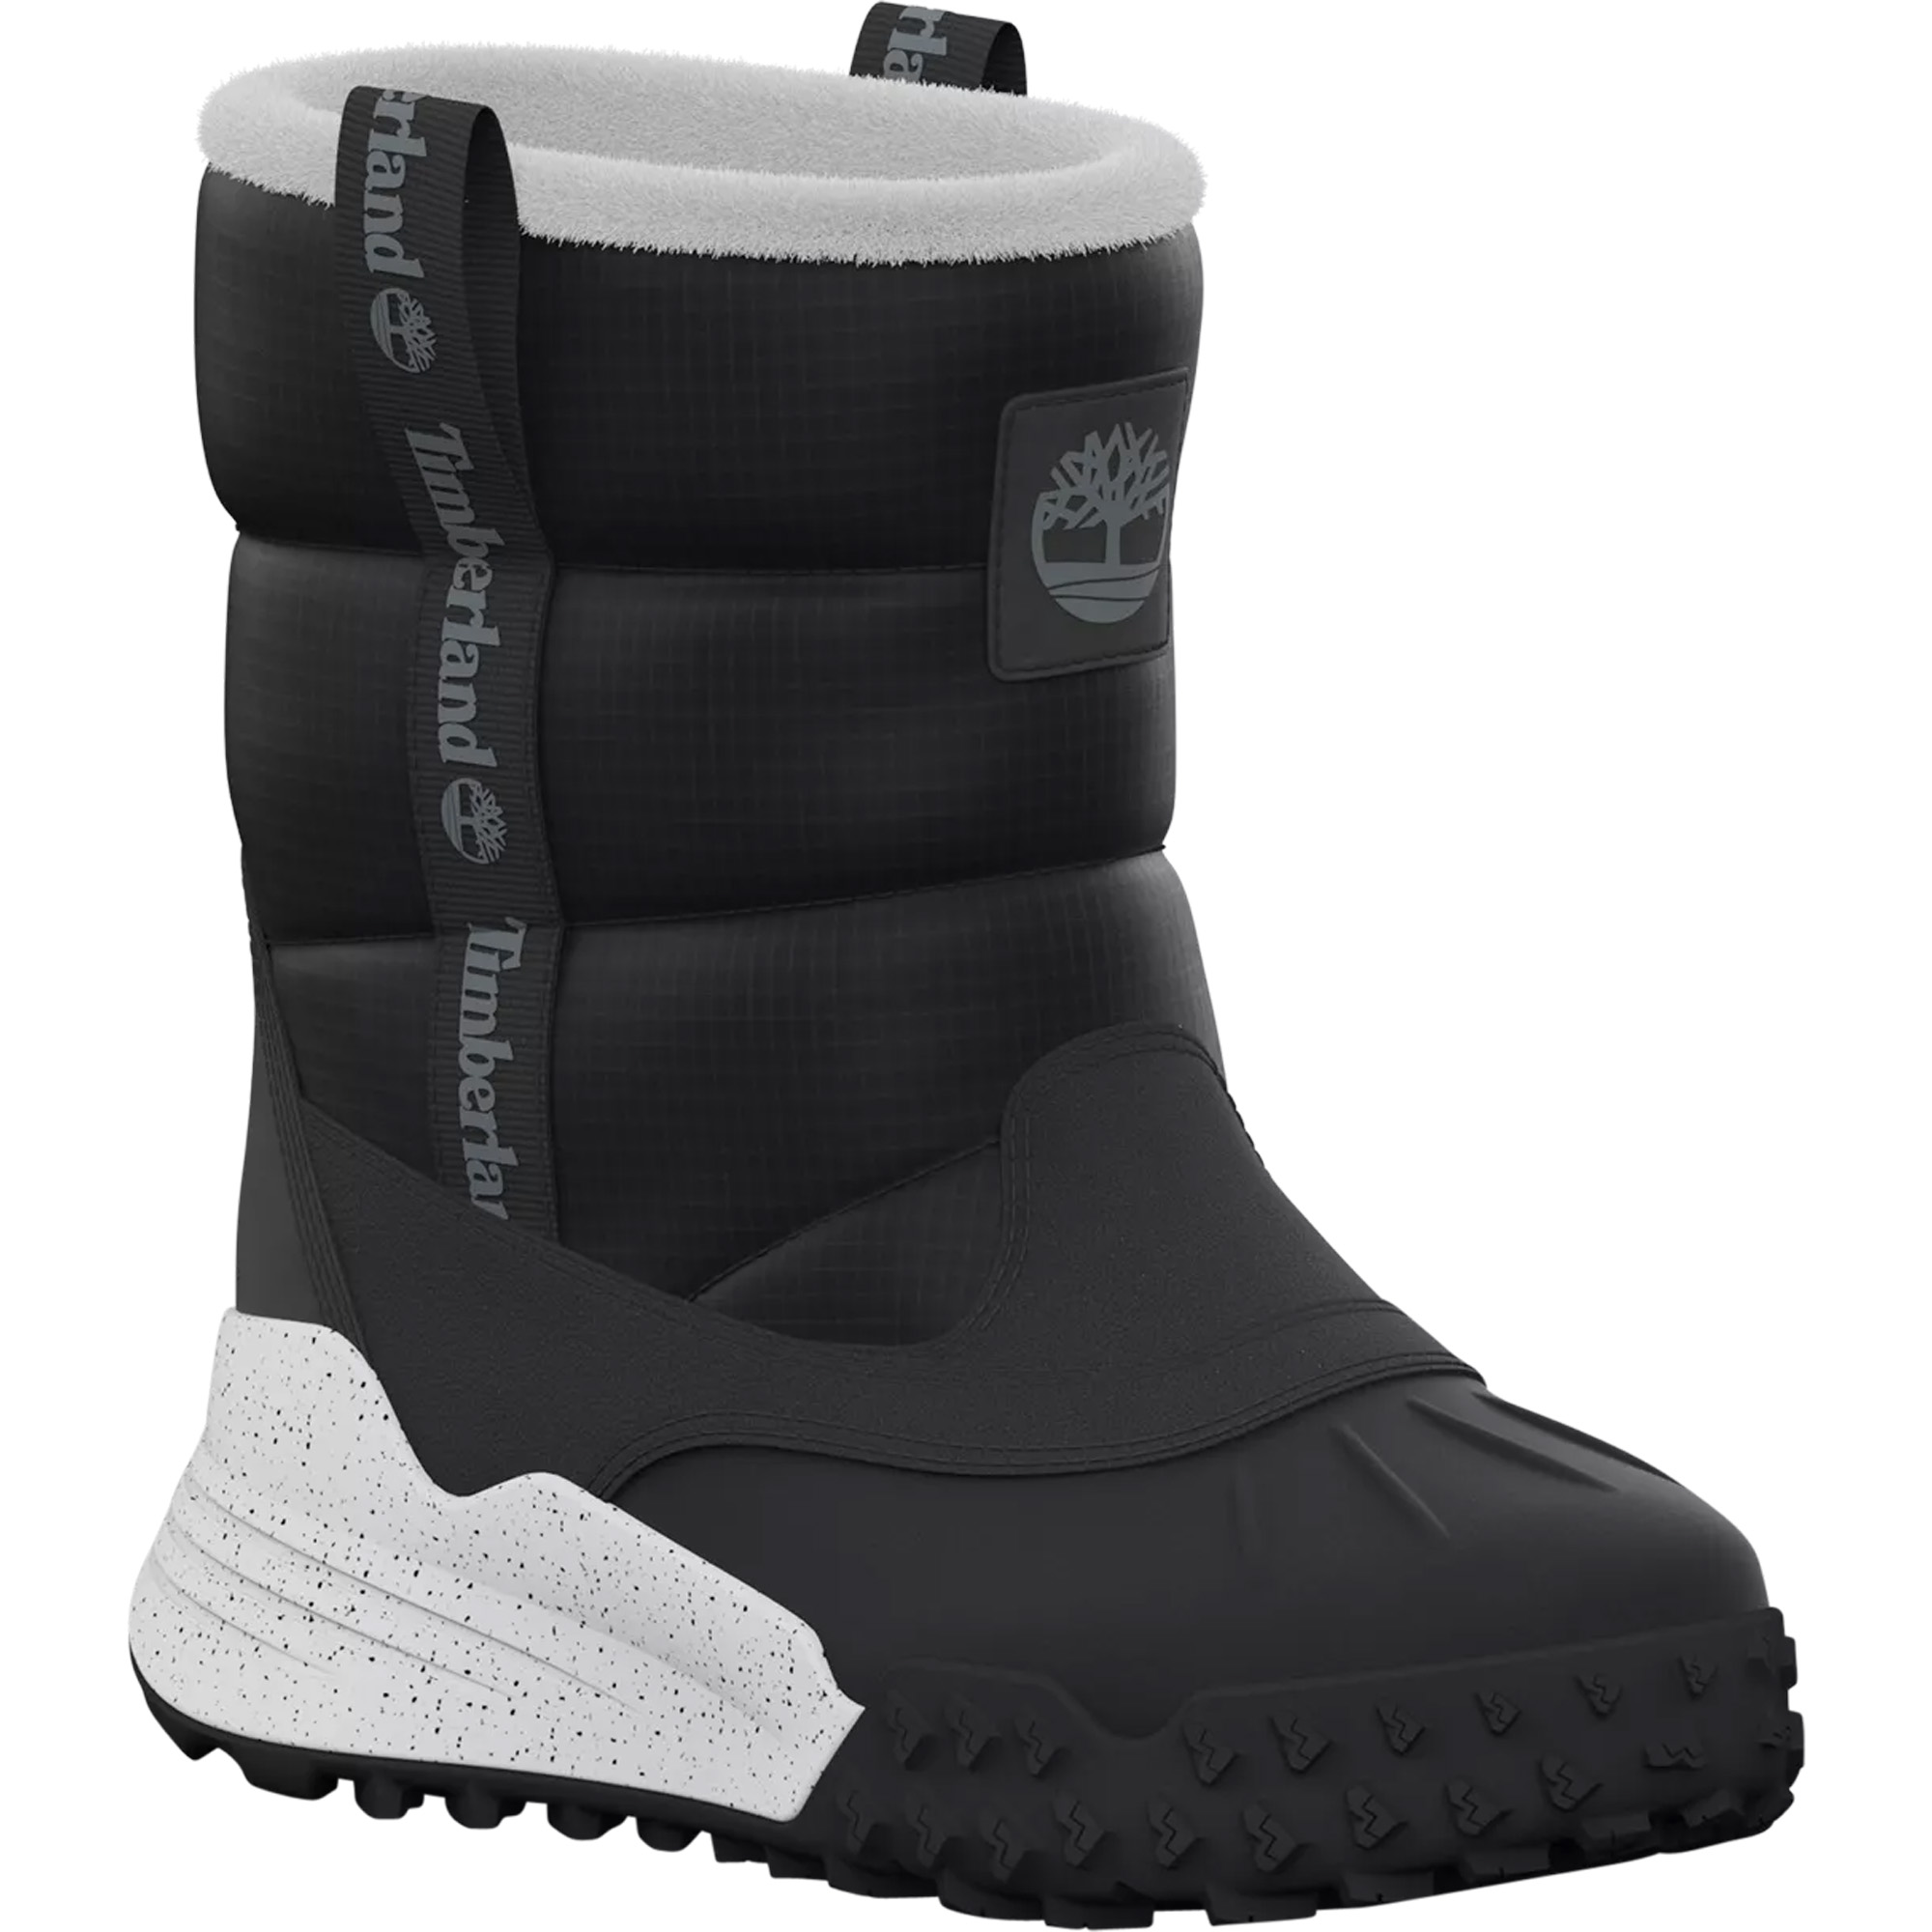 Timberland Moriah Range Insulated Pull-On Women's Snow Boots